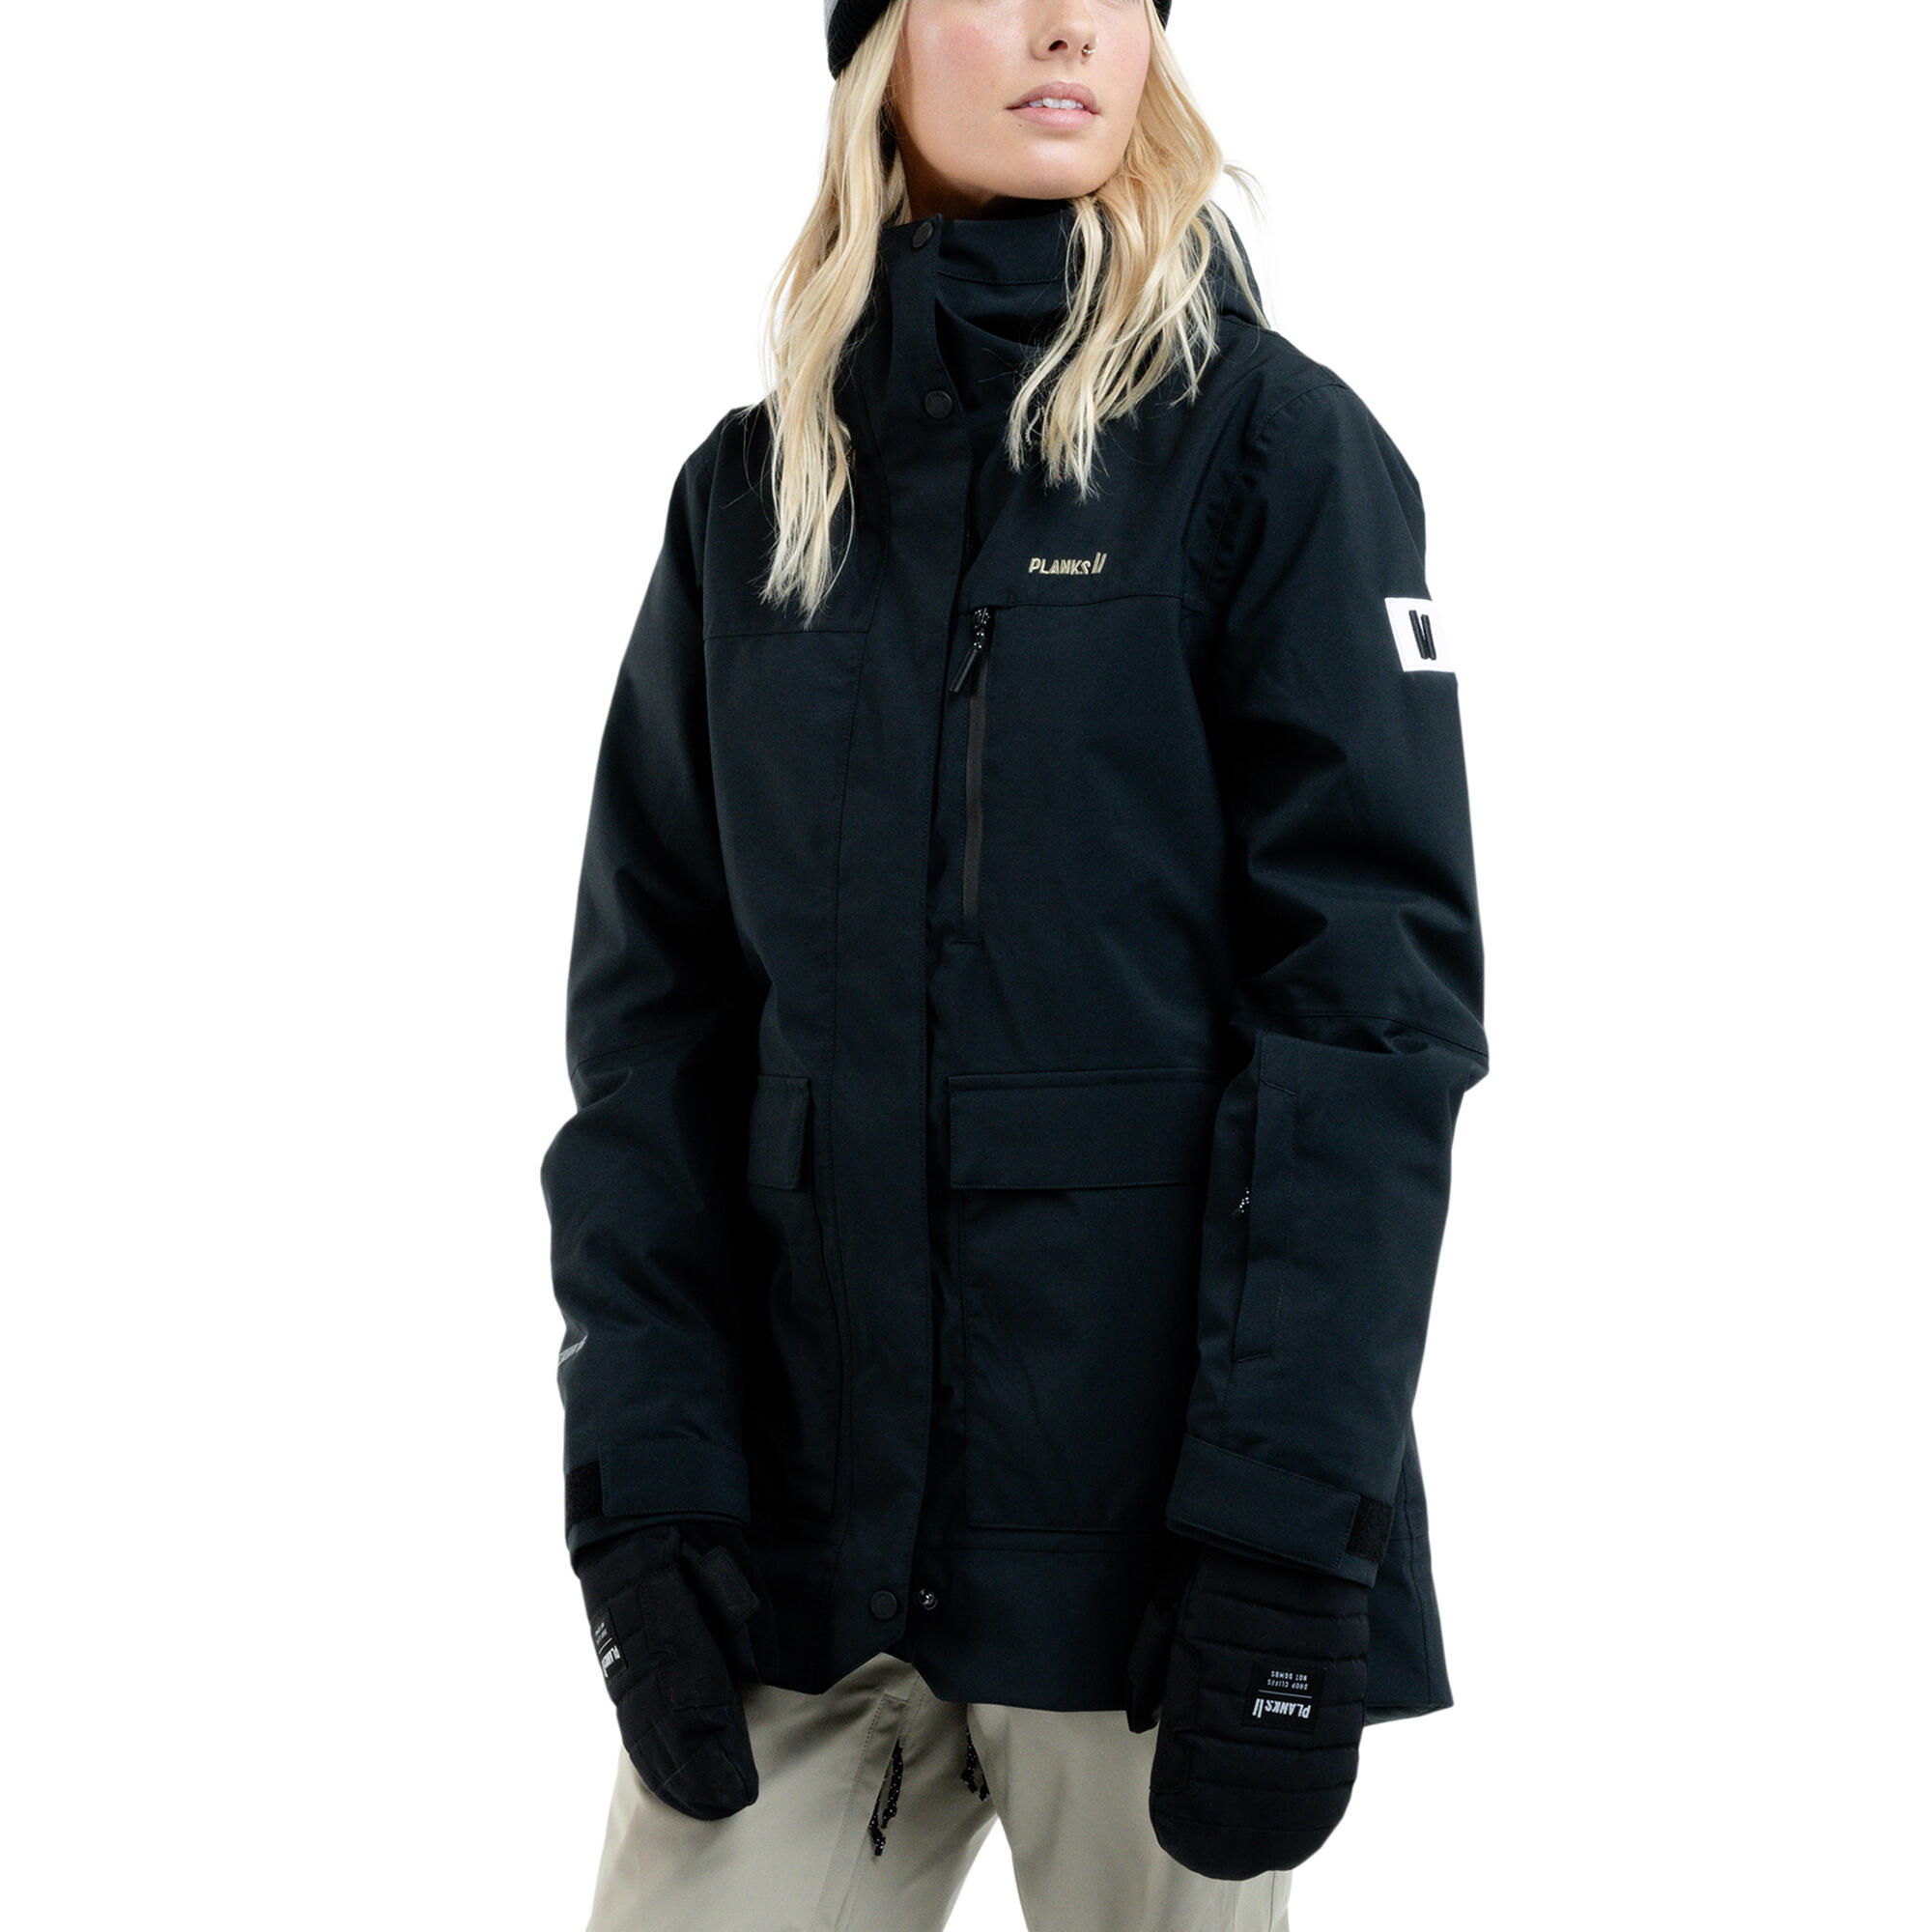 Planks All-Time Women's Insulated Ski Jacket in Black Ladies Hooded Snow Coat 1/4